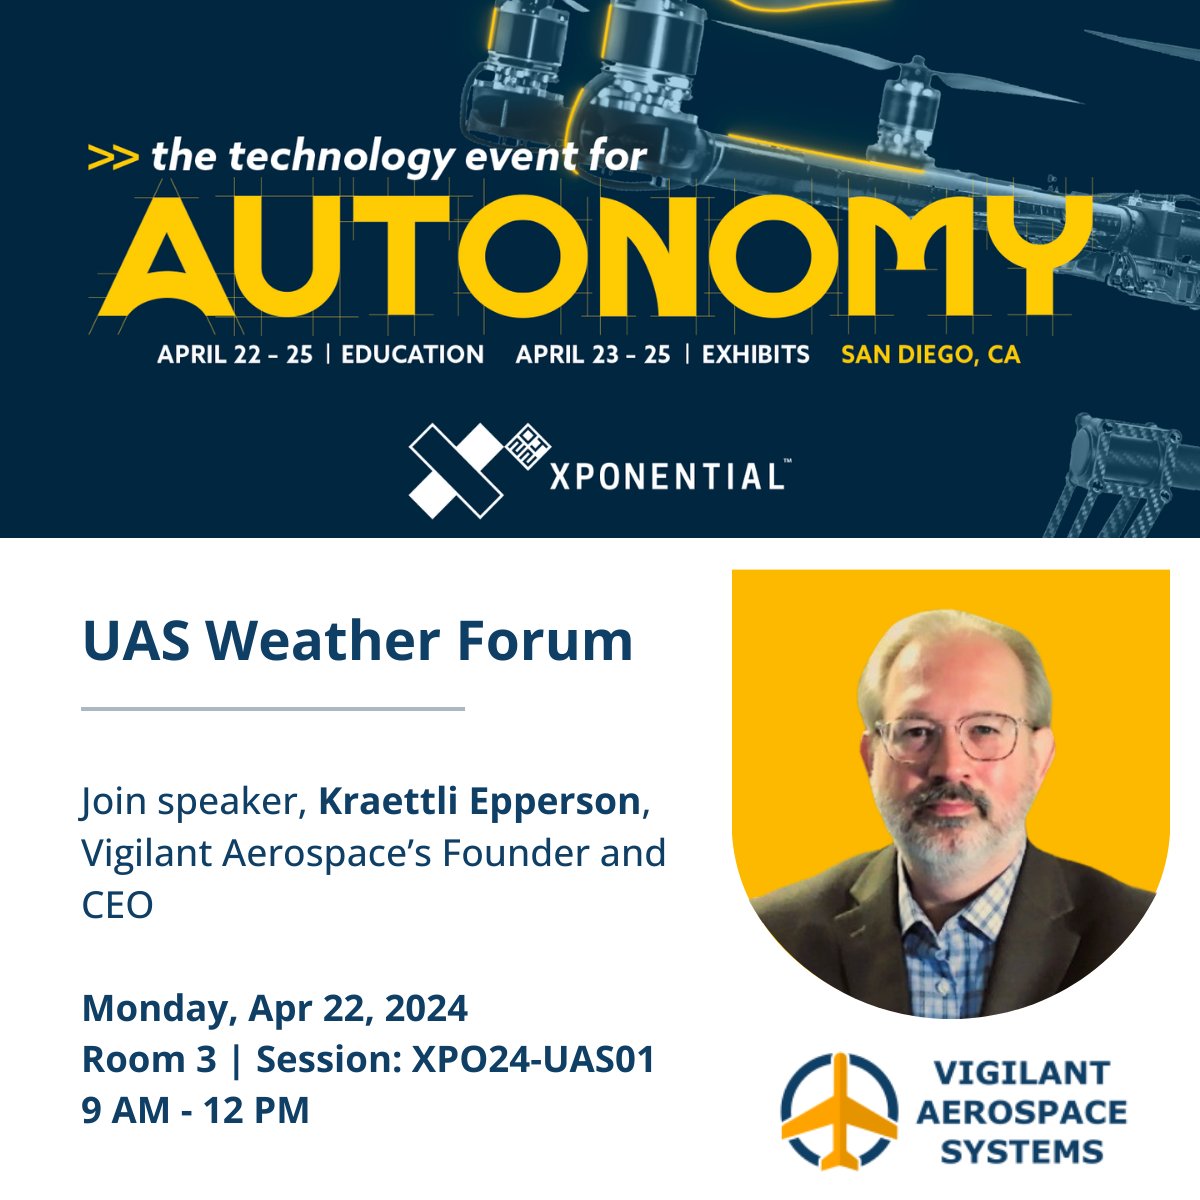 Hear Vigilant Aerospace CEO Kraettli Epperson speak at XPONENTIAL 2024!

Kraettli is part of the UAS Weather Forum from 9 a.m. to noon April 22 in Room: 3 - Session Number: XPO24-UAS01

We hope to see you there!

#XPO24 #uas #innovation